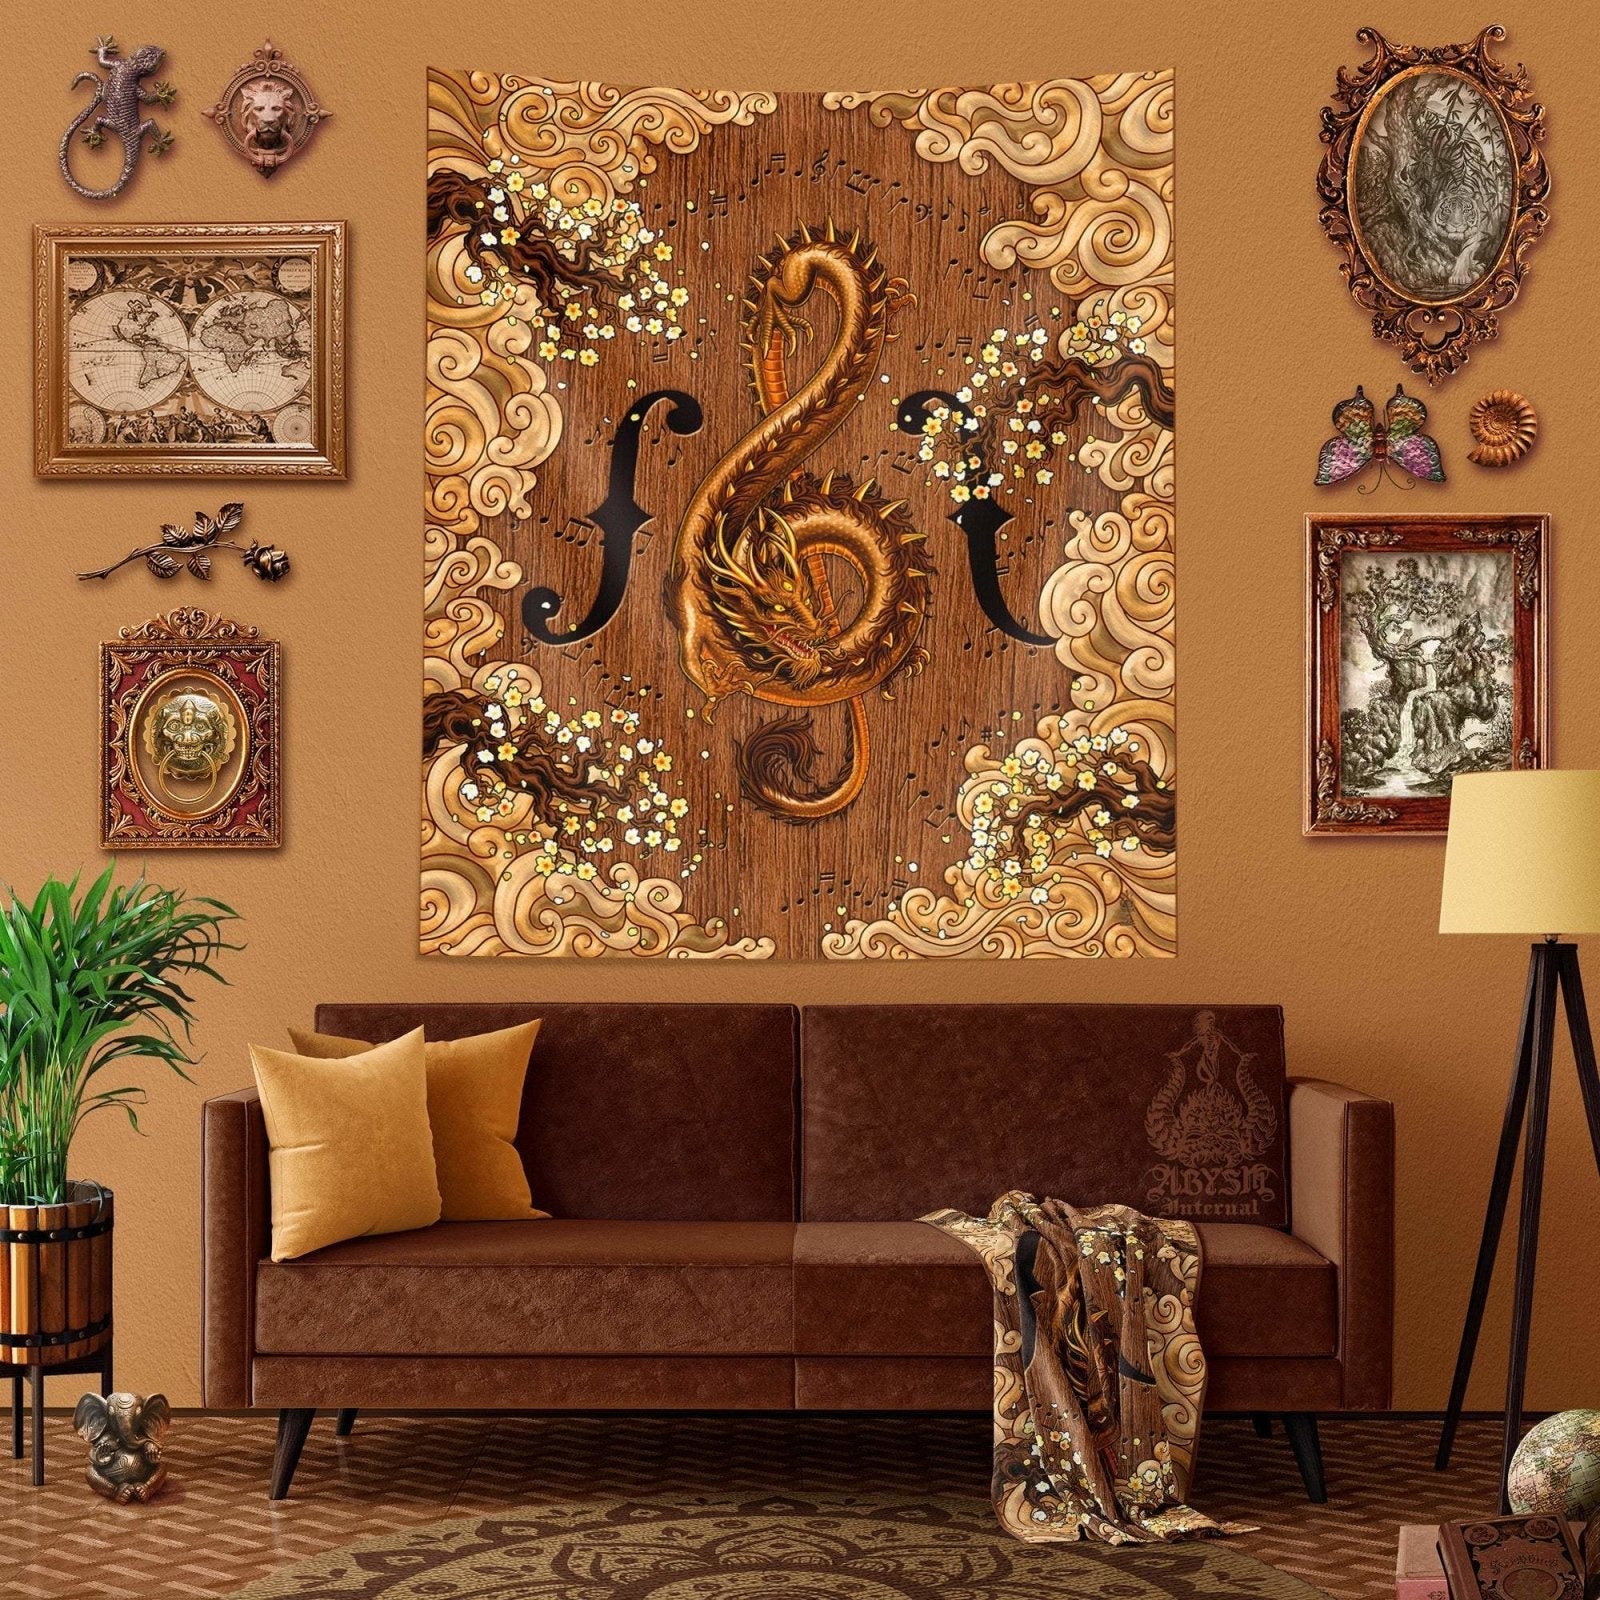 Dragon Tapestry, Music Wall Hanging, Asian Home Decor, Vertical